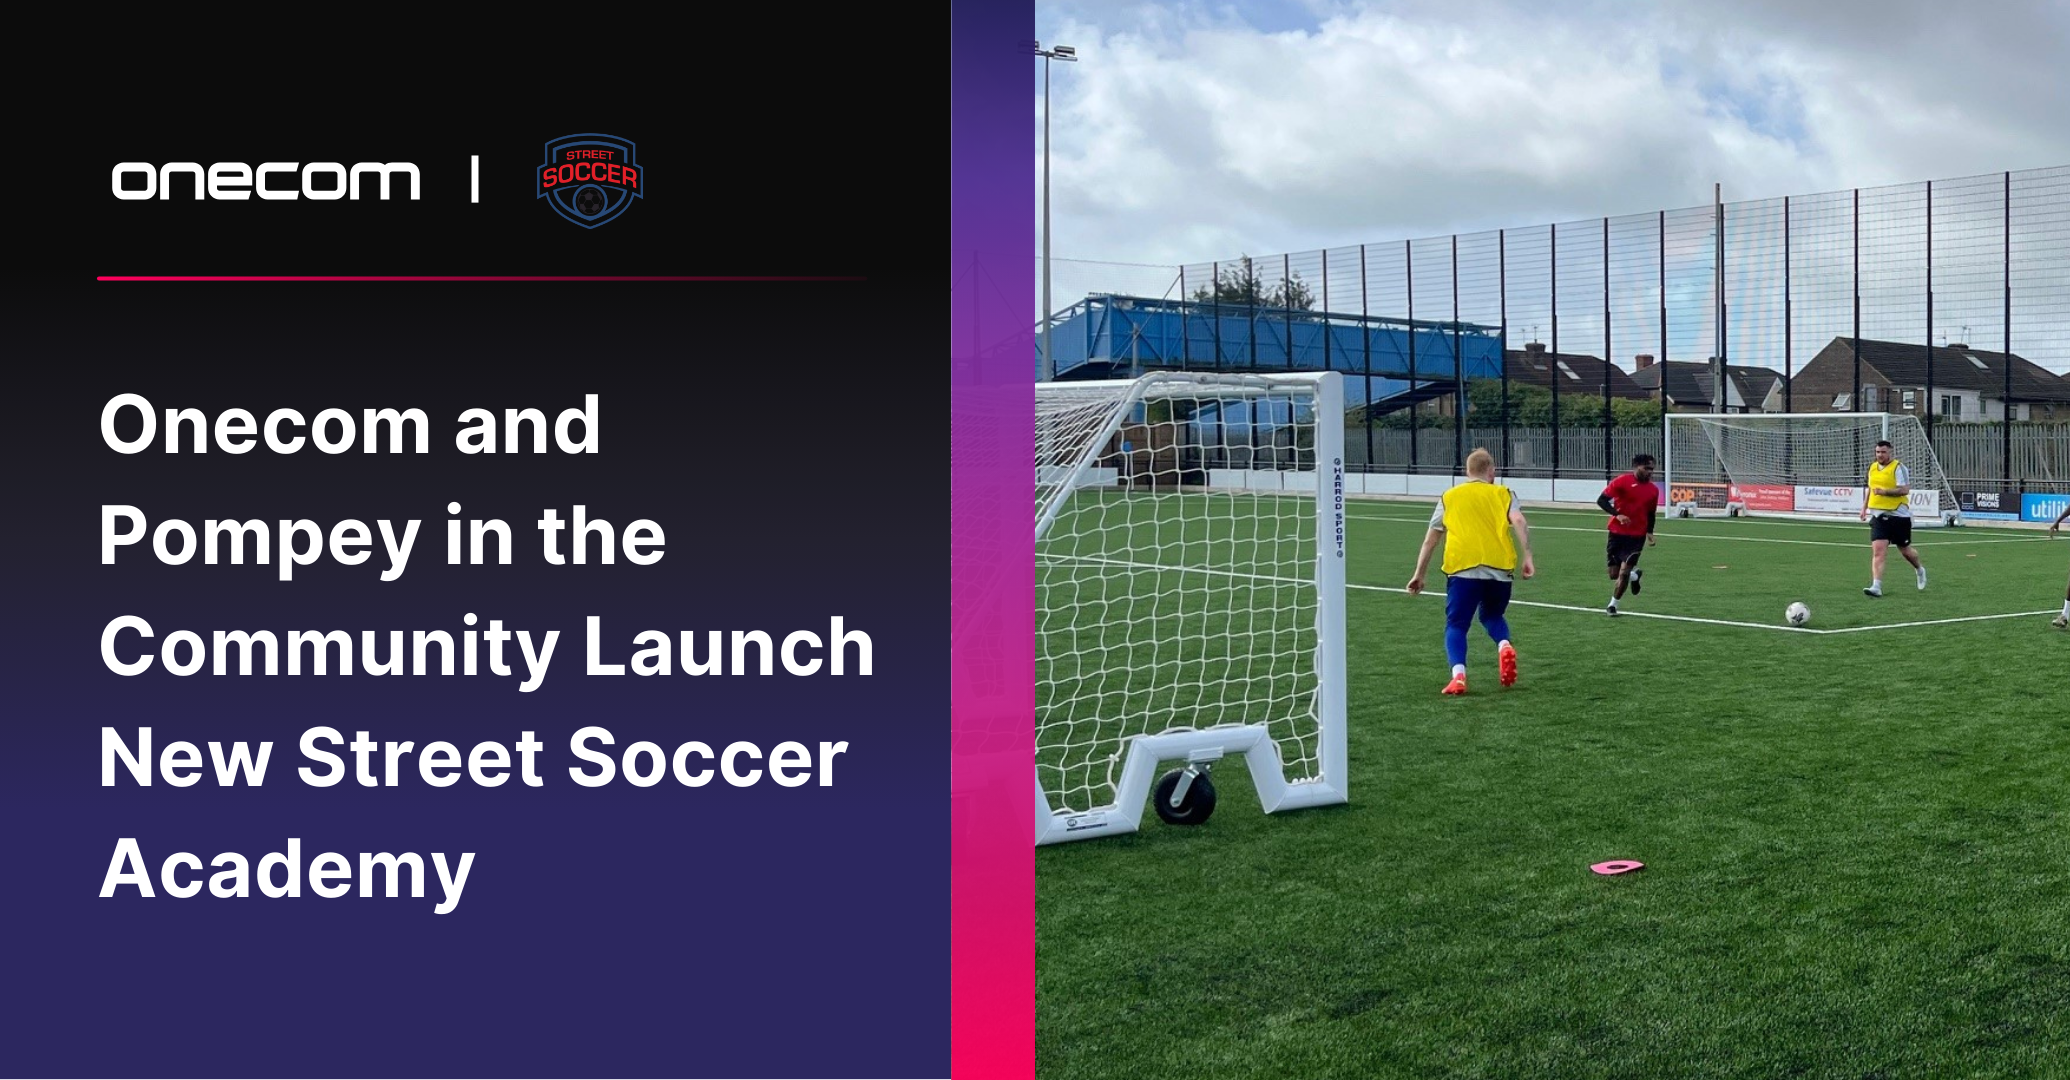 Onecom and Pompey in the Community Launch New Street Soccer Academy